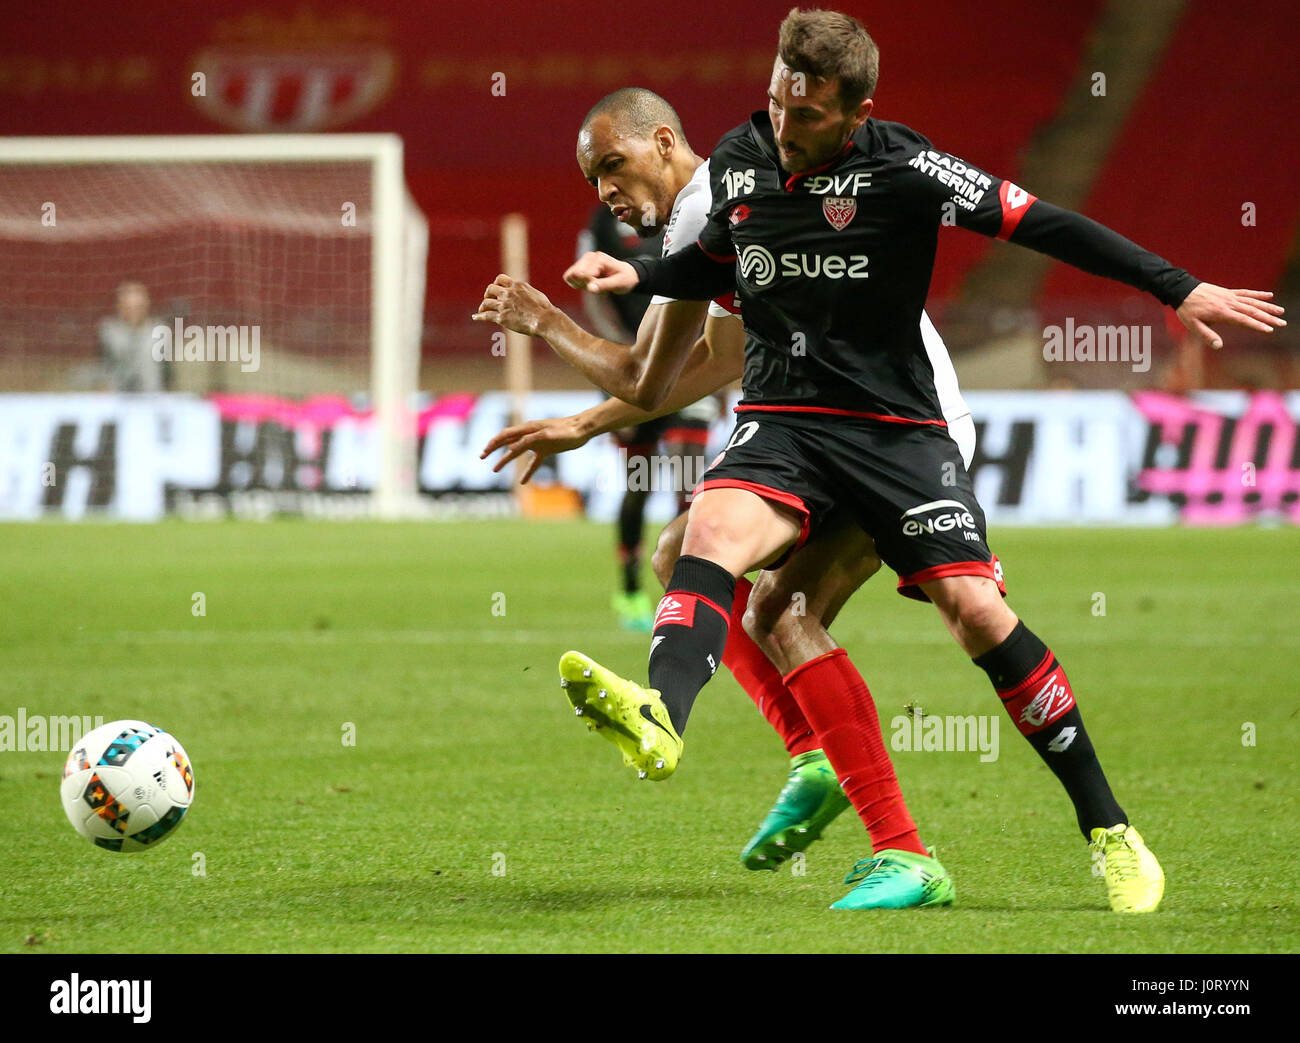 Fontvieille. 15th Apr, 2017. Romain Amalfitano (Front) of Dijon competes with Fabinho of AS Monaco during their match in Fontvielle, Monaco on April 15, 2017. AS Monaco won 2-1. Credit: Serge Haouzi/Xinhua/Alamy Live News Stock Photo